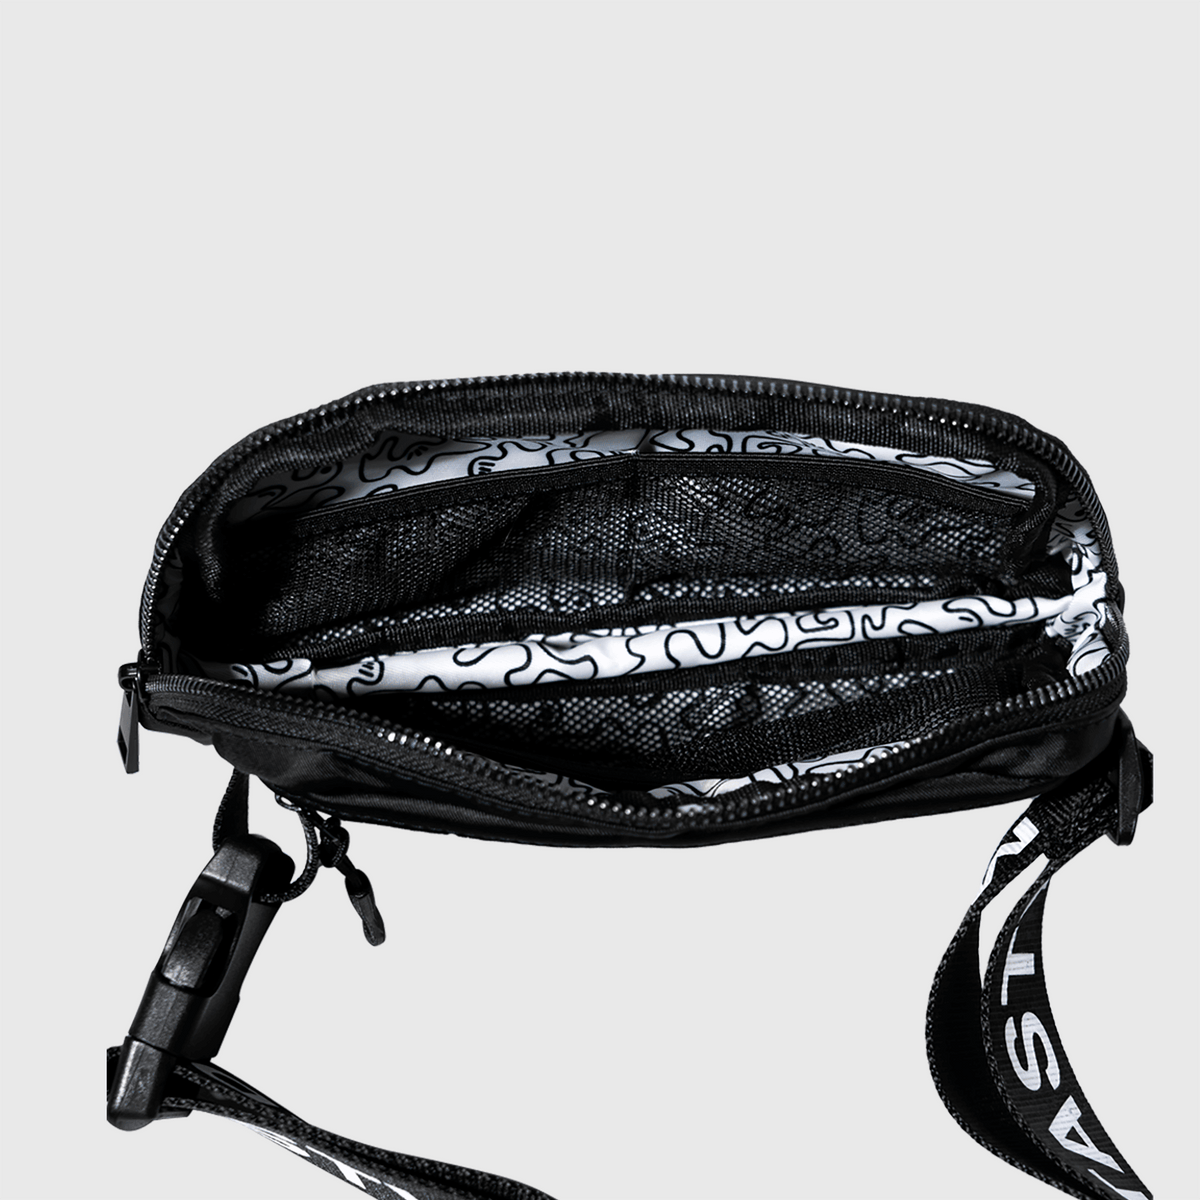 MAD TASTY custom black fanny pack with adjustable strap, zipper closer, outside and inside pockets. MAD TASTY logo on front and straps, with squiggles on inside liner.